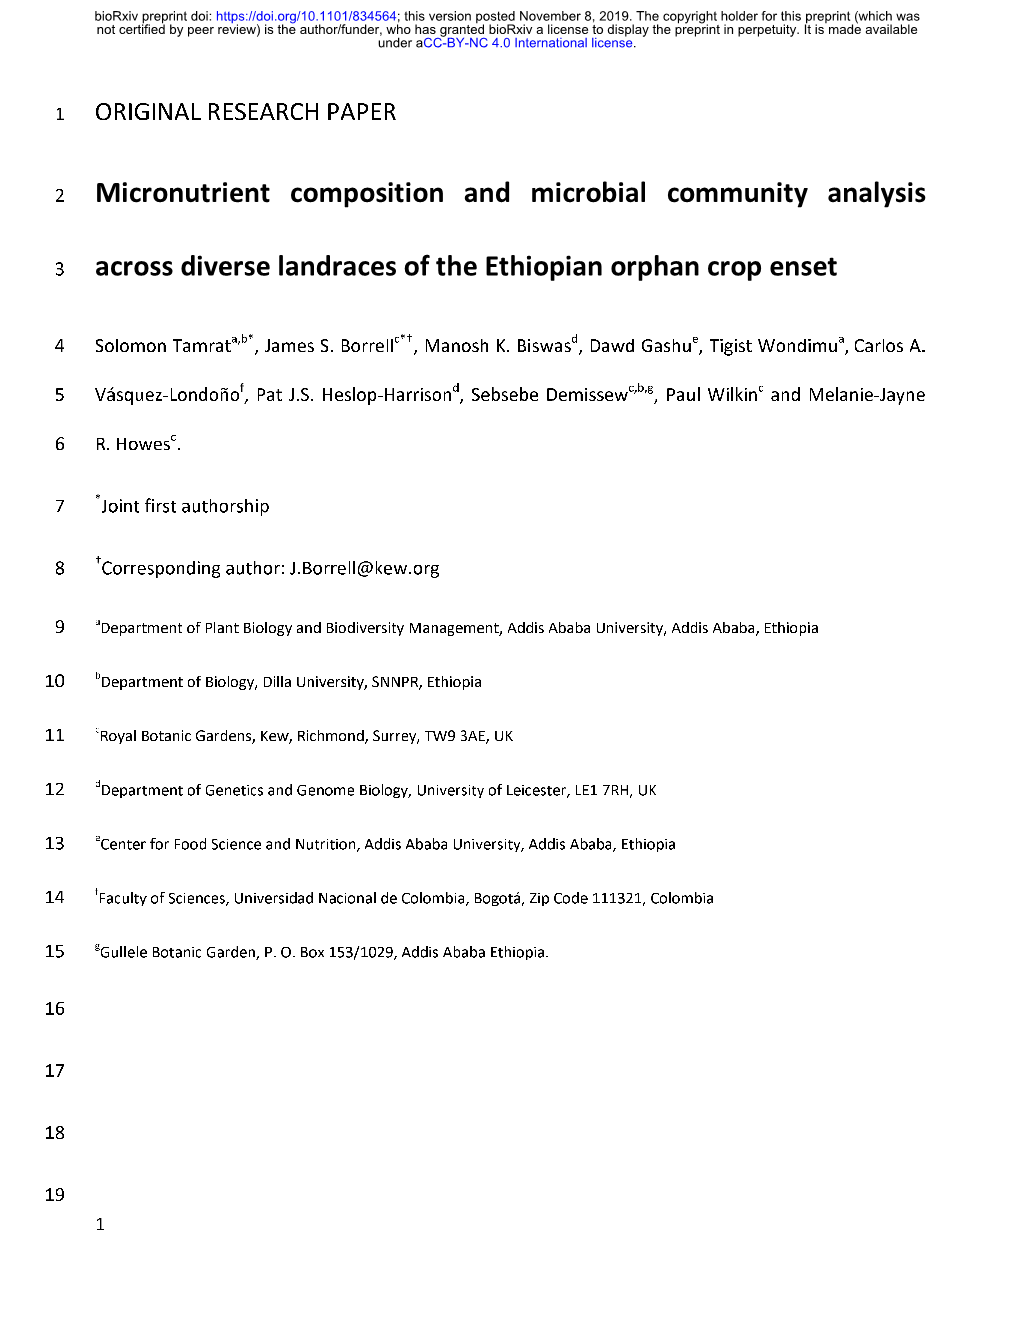 Micronutrient Composition and Microbial Community Analysis